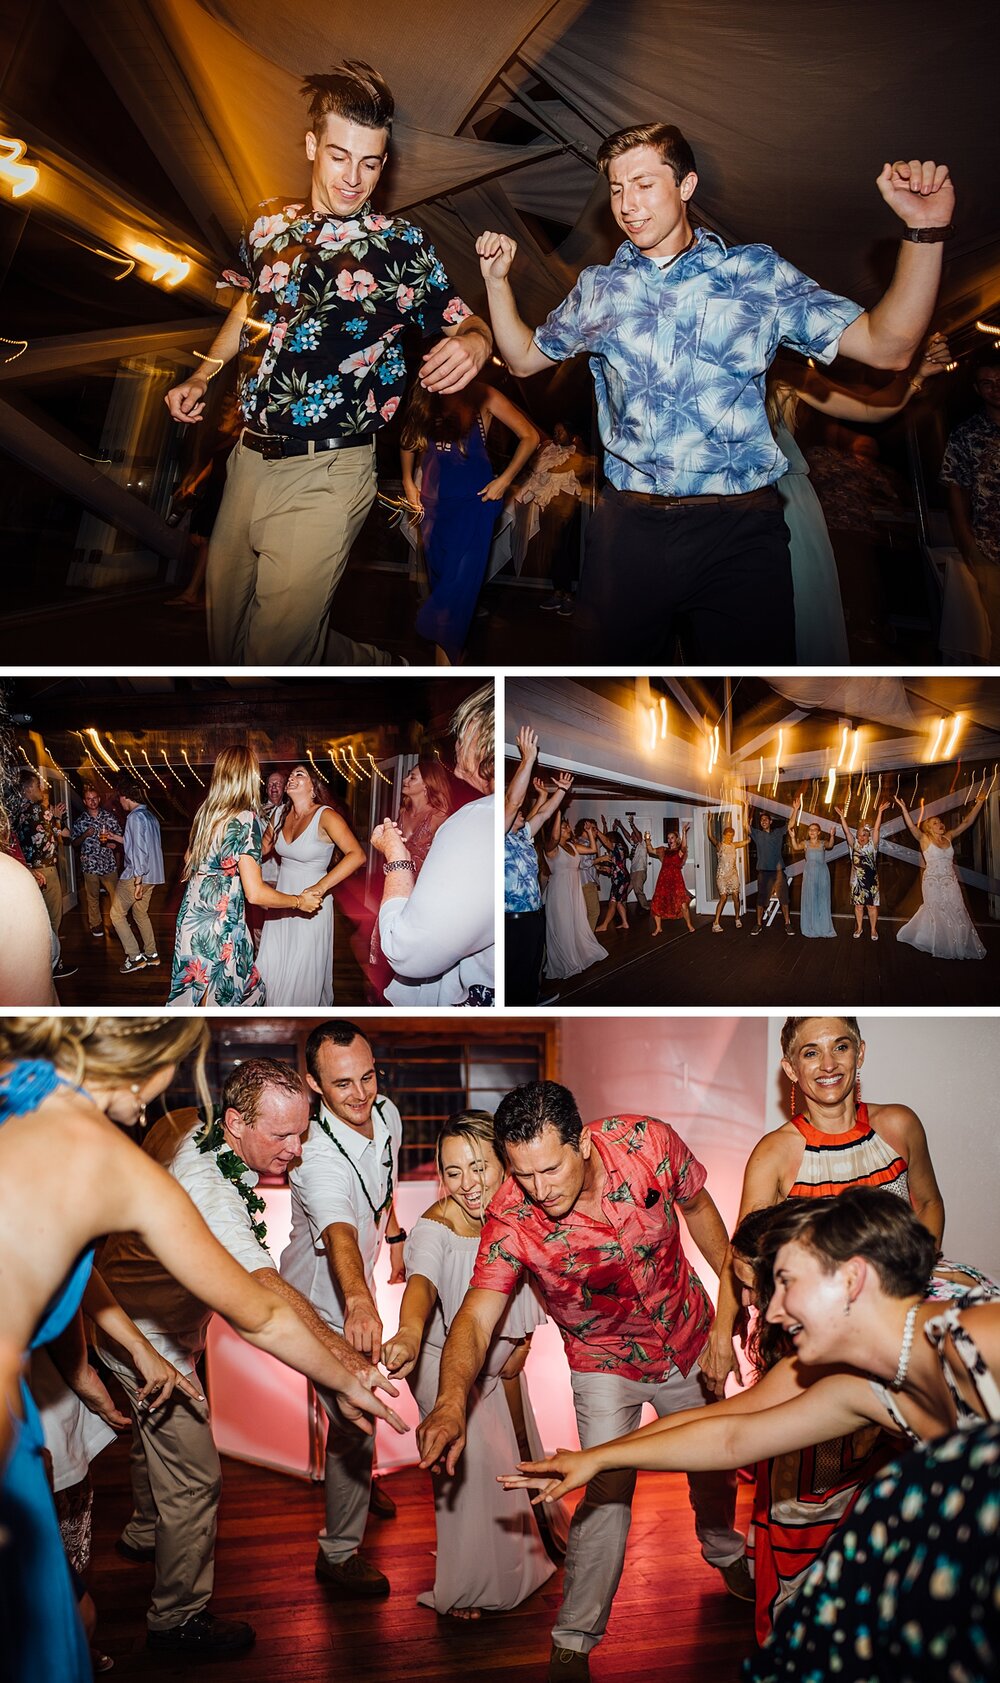 dance floor at this wedding in papa kona photographed by ann ferguson